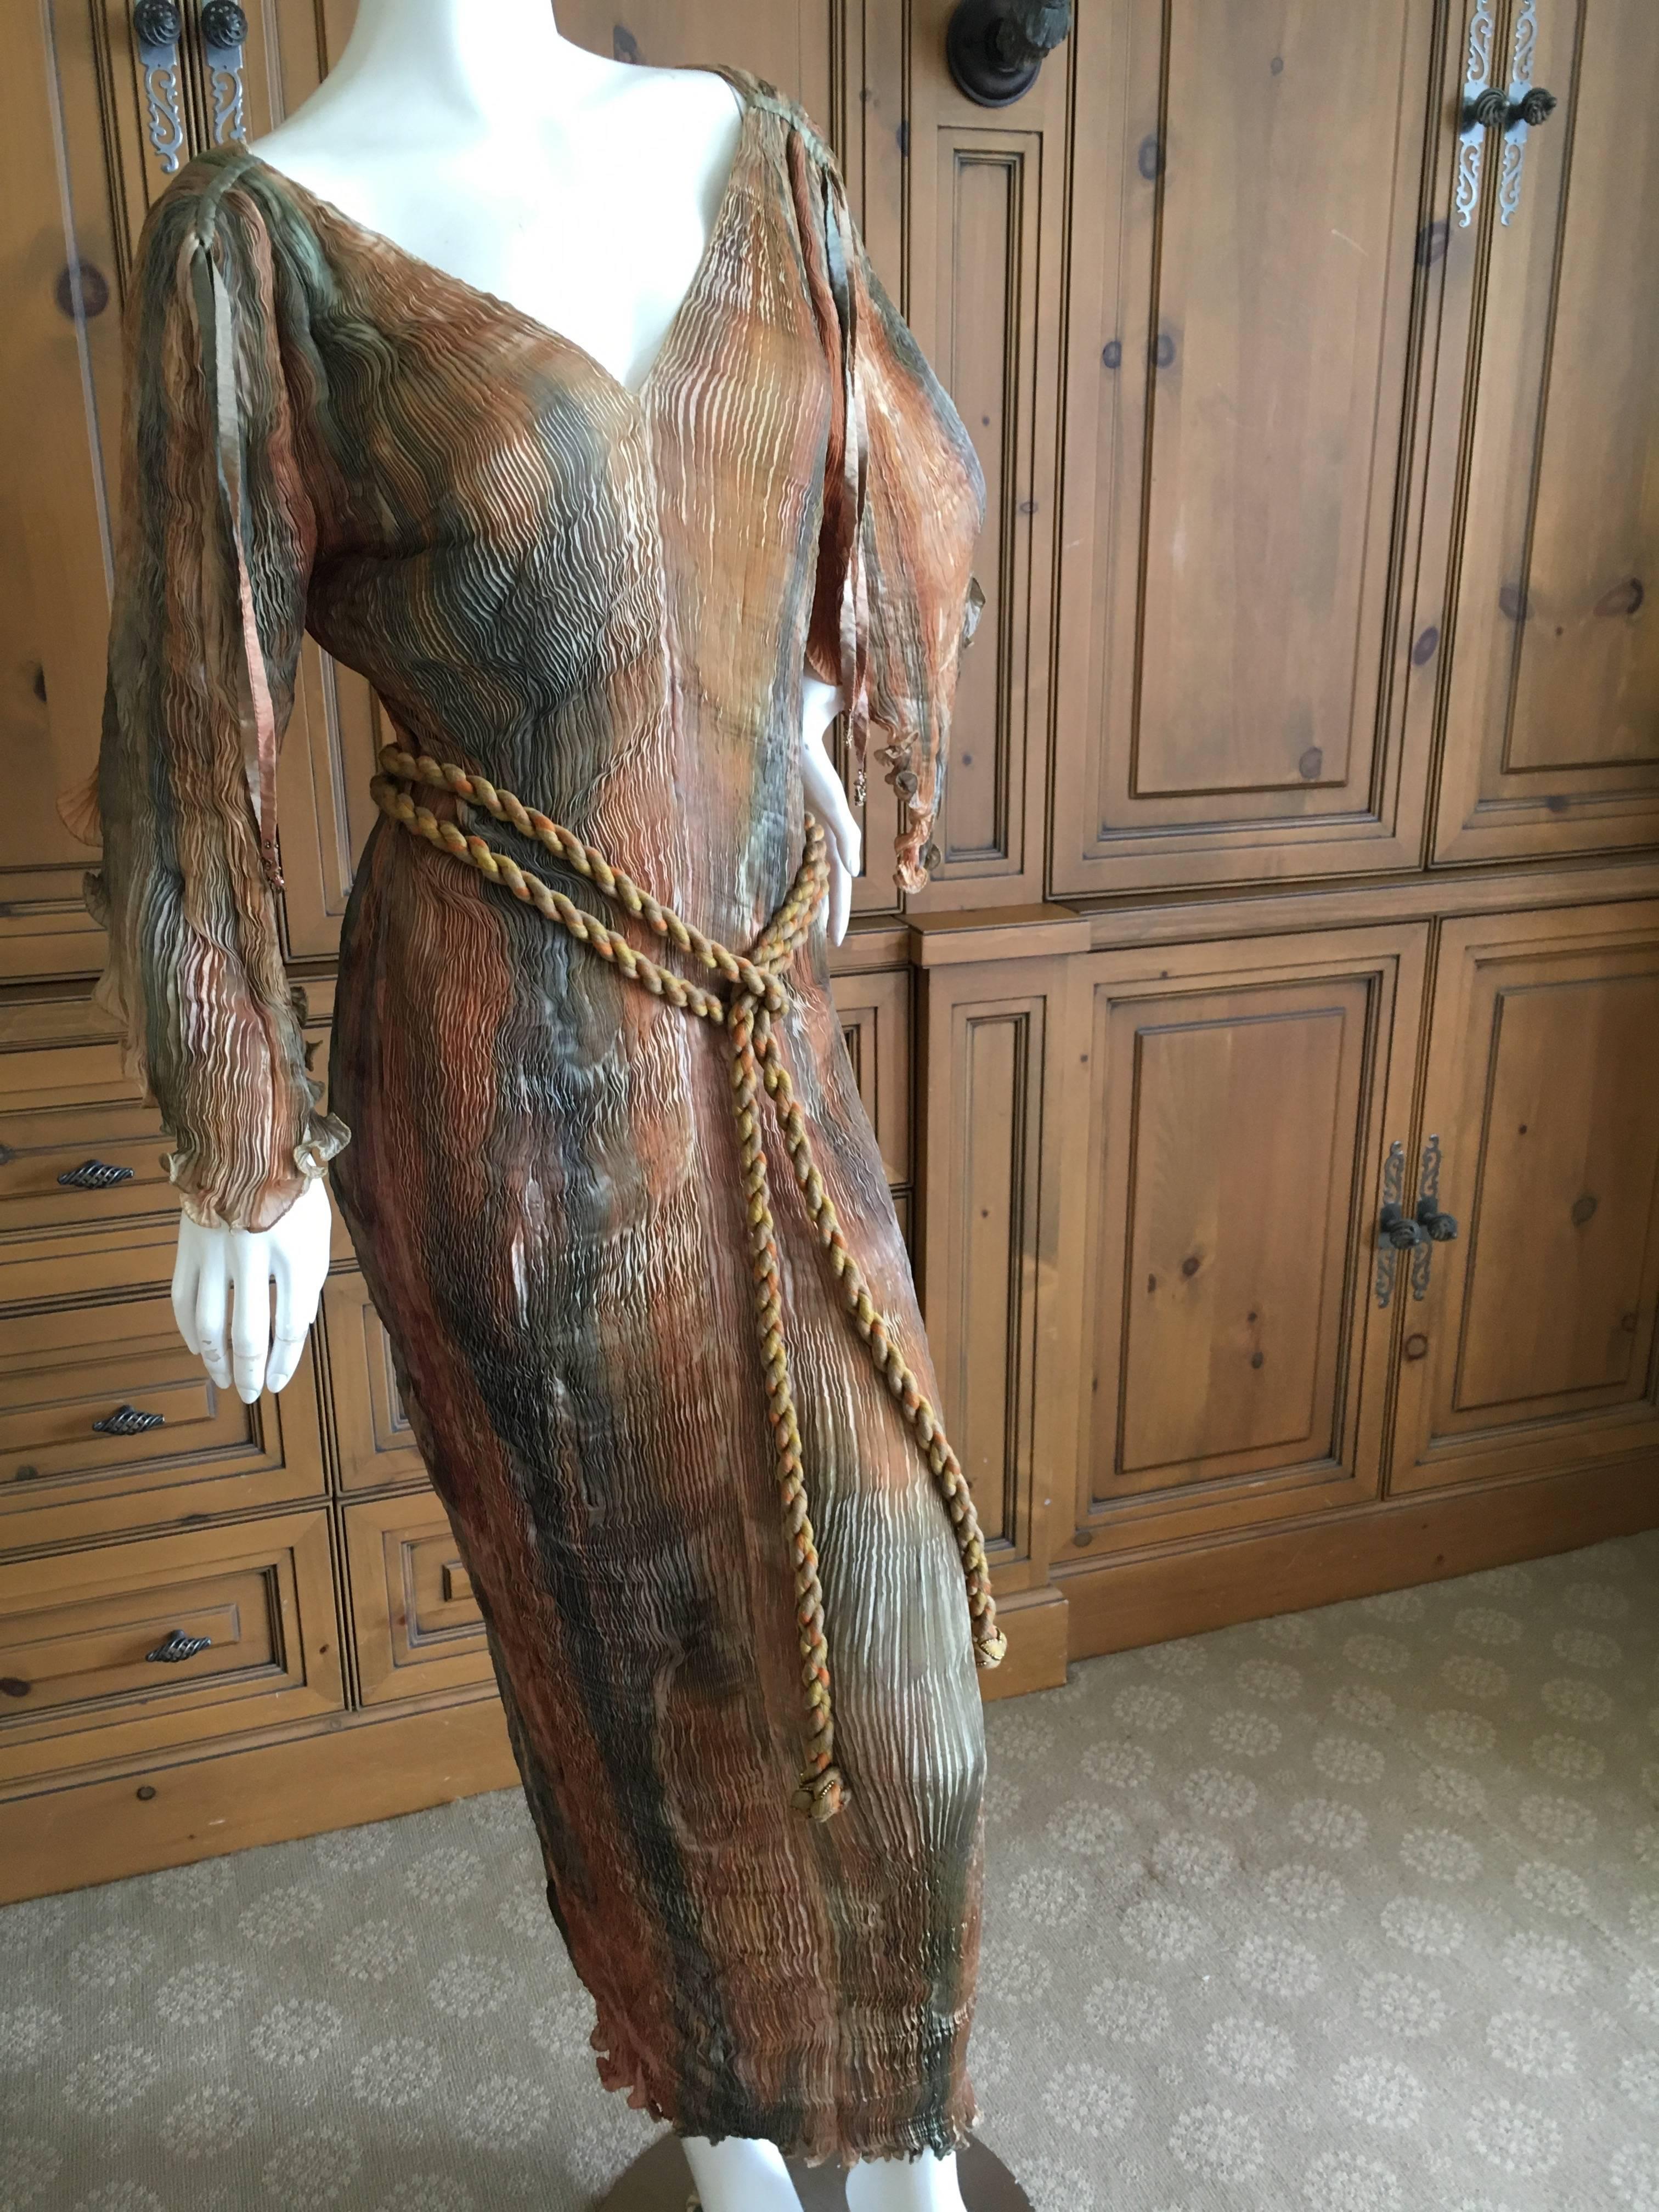 Patricia Lester Wales Rare Hand Dyed Plisse Pleated Low Cut Dress with Belt and Bag.
This is a tie dye the of dying process.
Patricia Lester Fortuny Style Plisse Pleated Dress. Created painstakingly by hand in Wales, this is plisse pleated in the